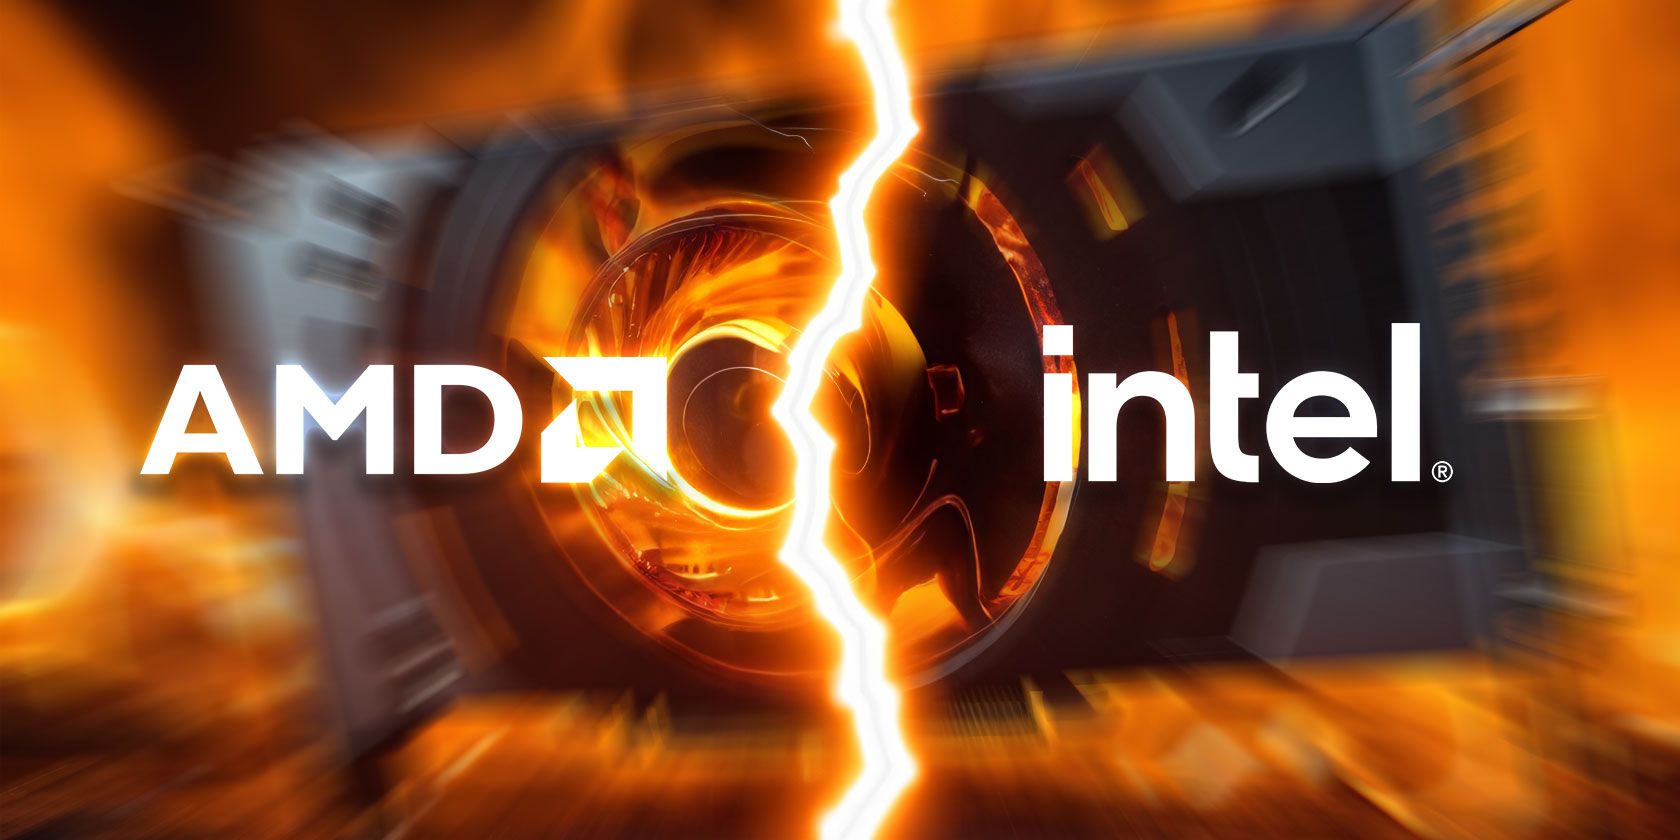 AMD and Intel logos, a graphics card on fire